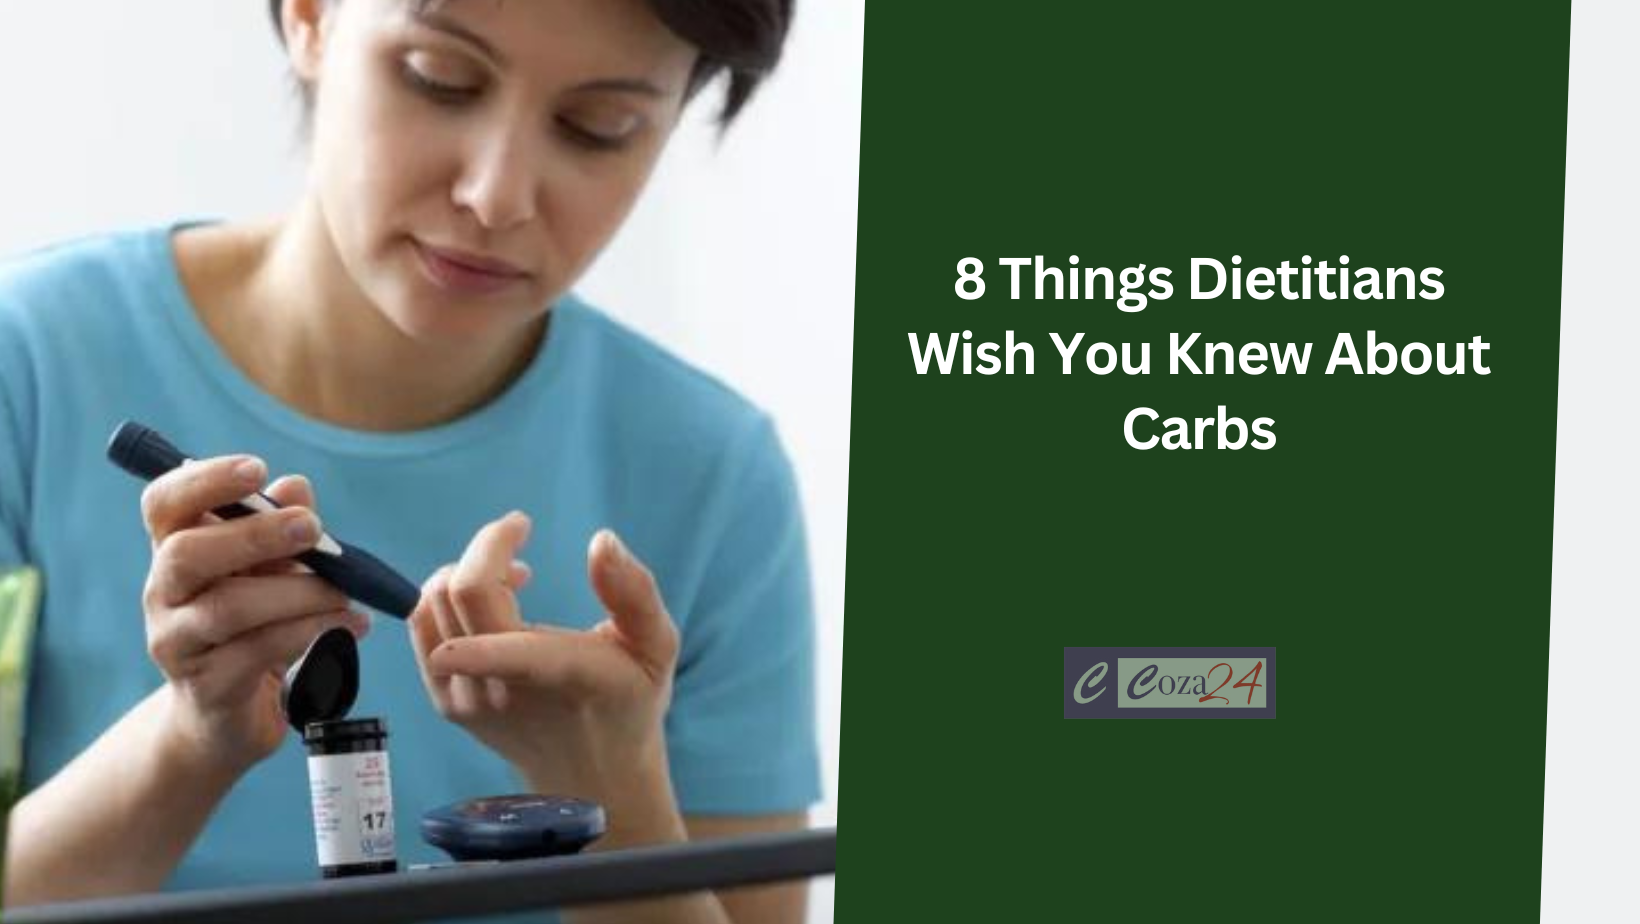 8 Things Dietitians Wish You Knew About Carbs